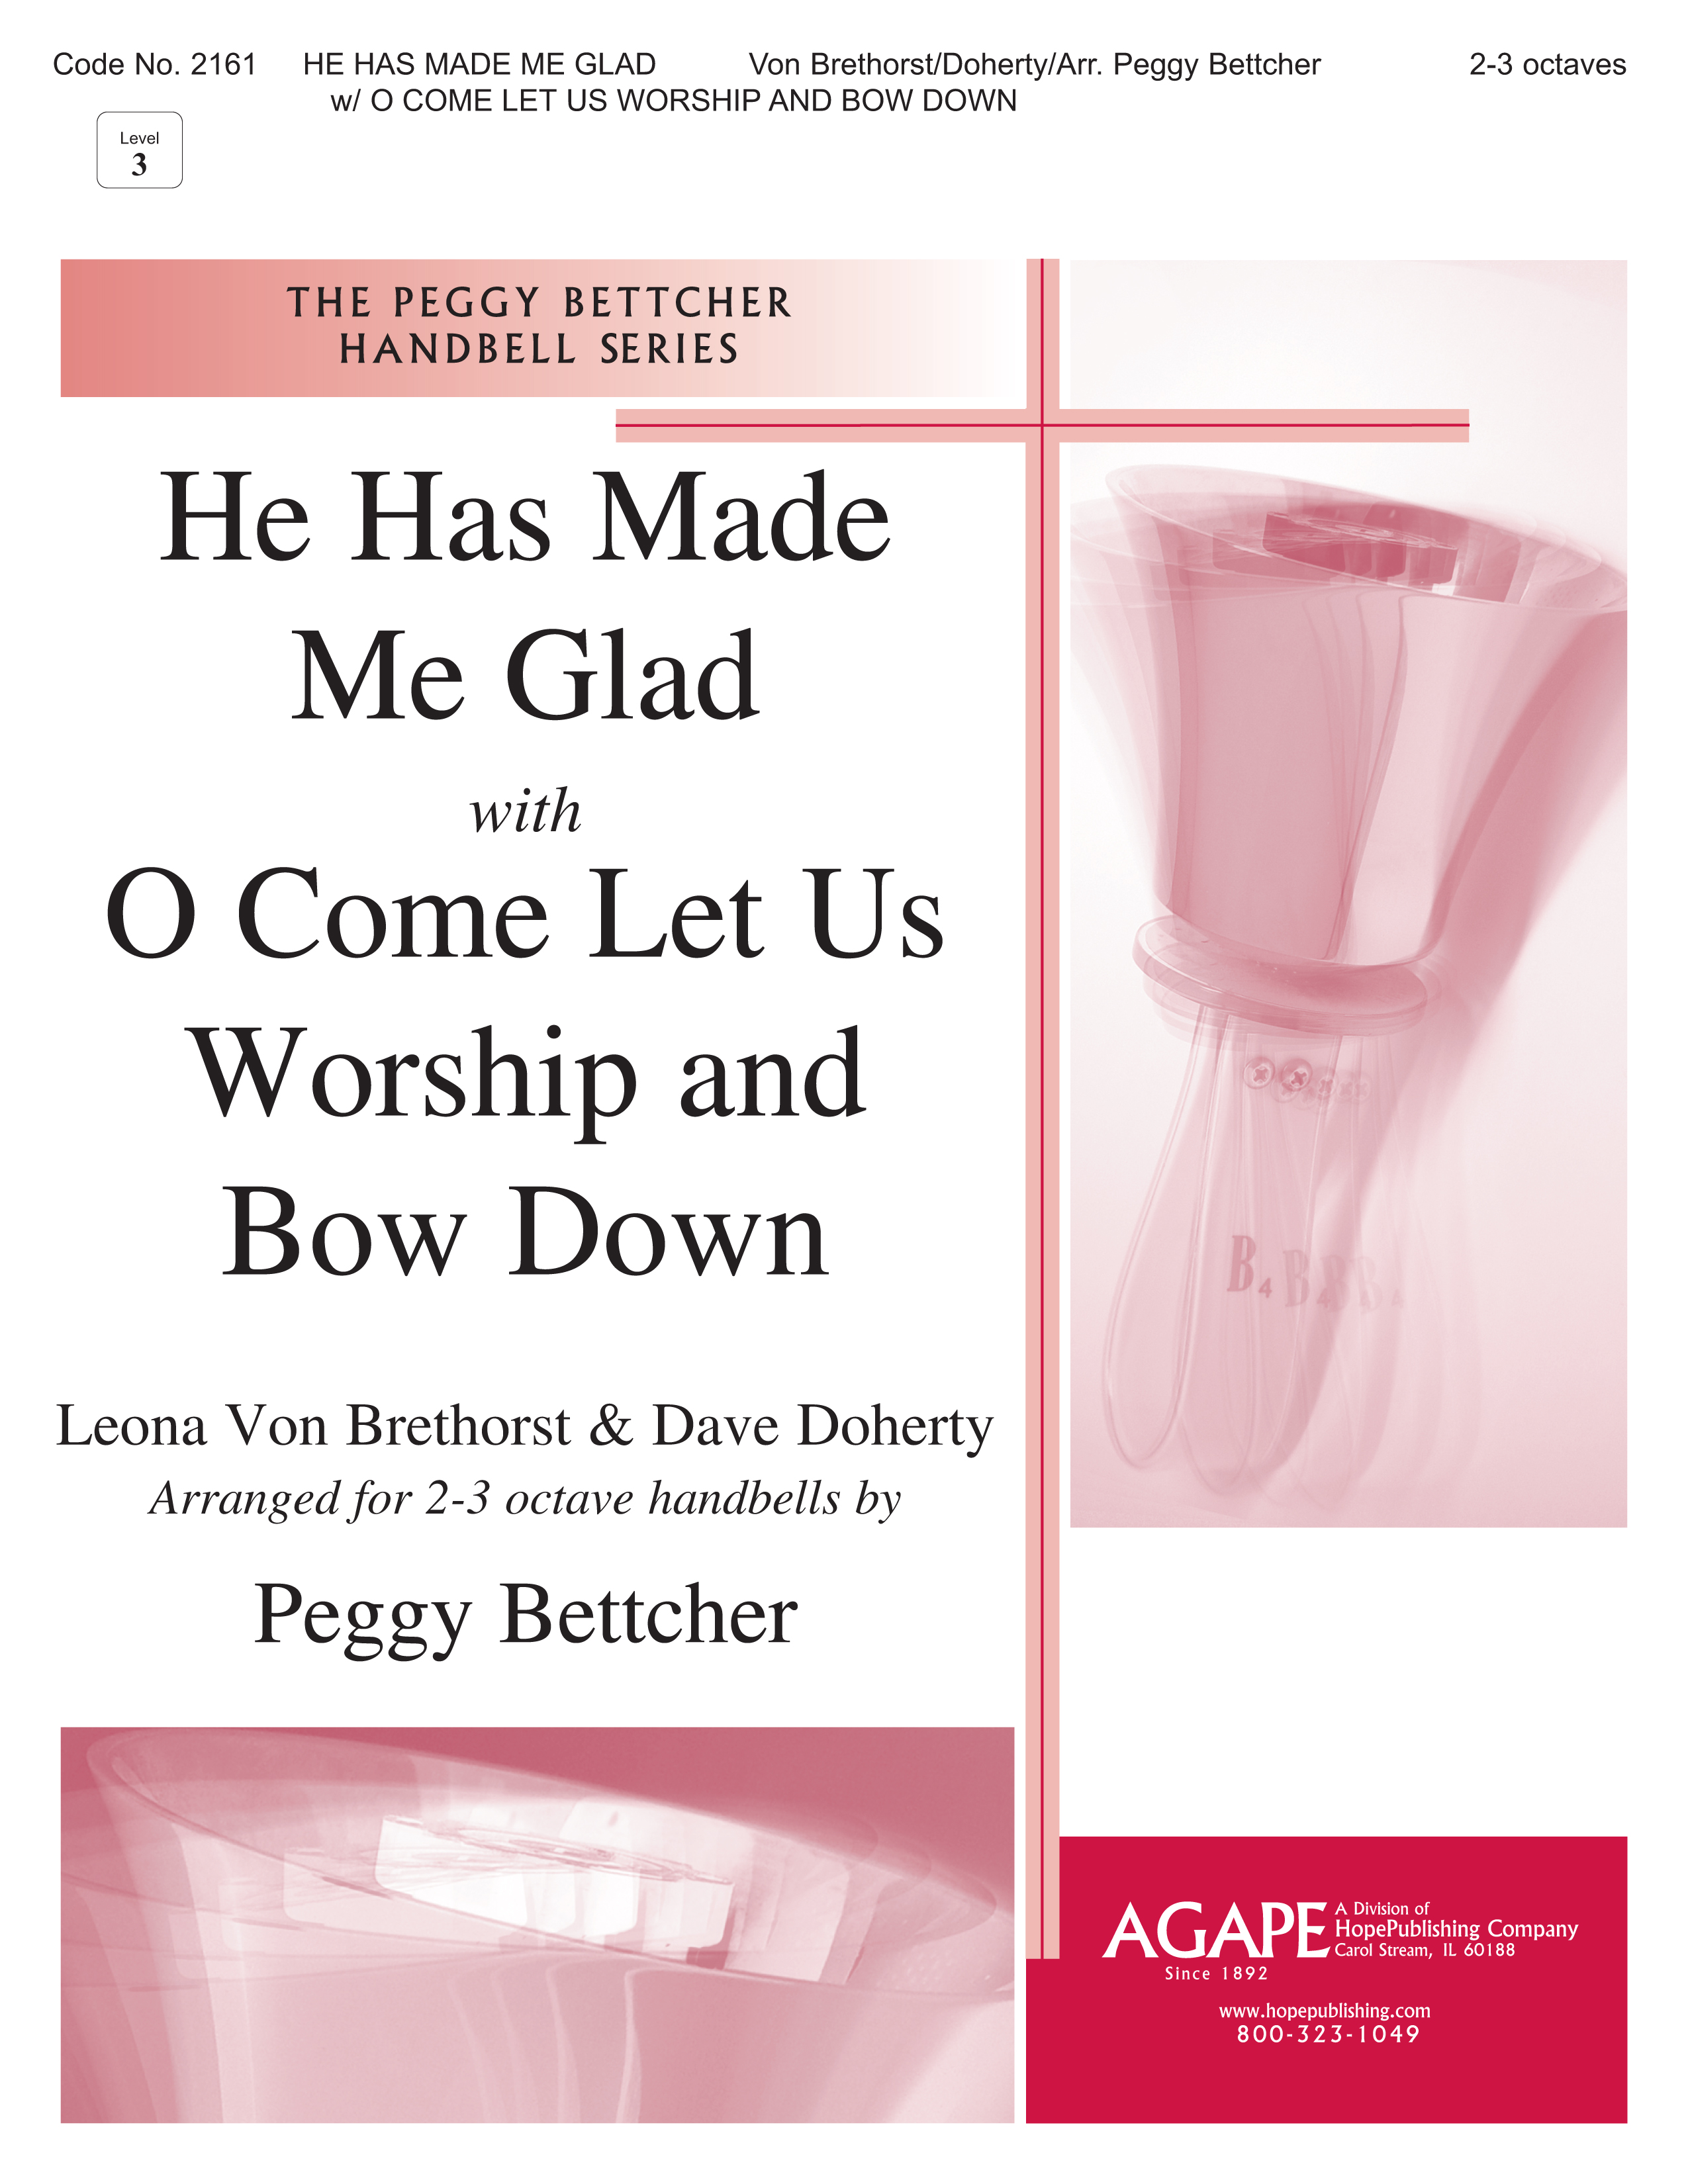 He Has Made Me Glad w-Come Let Us Worship and Bow Down - 2-3 Octave Cover Image